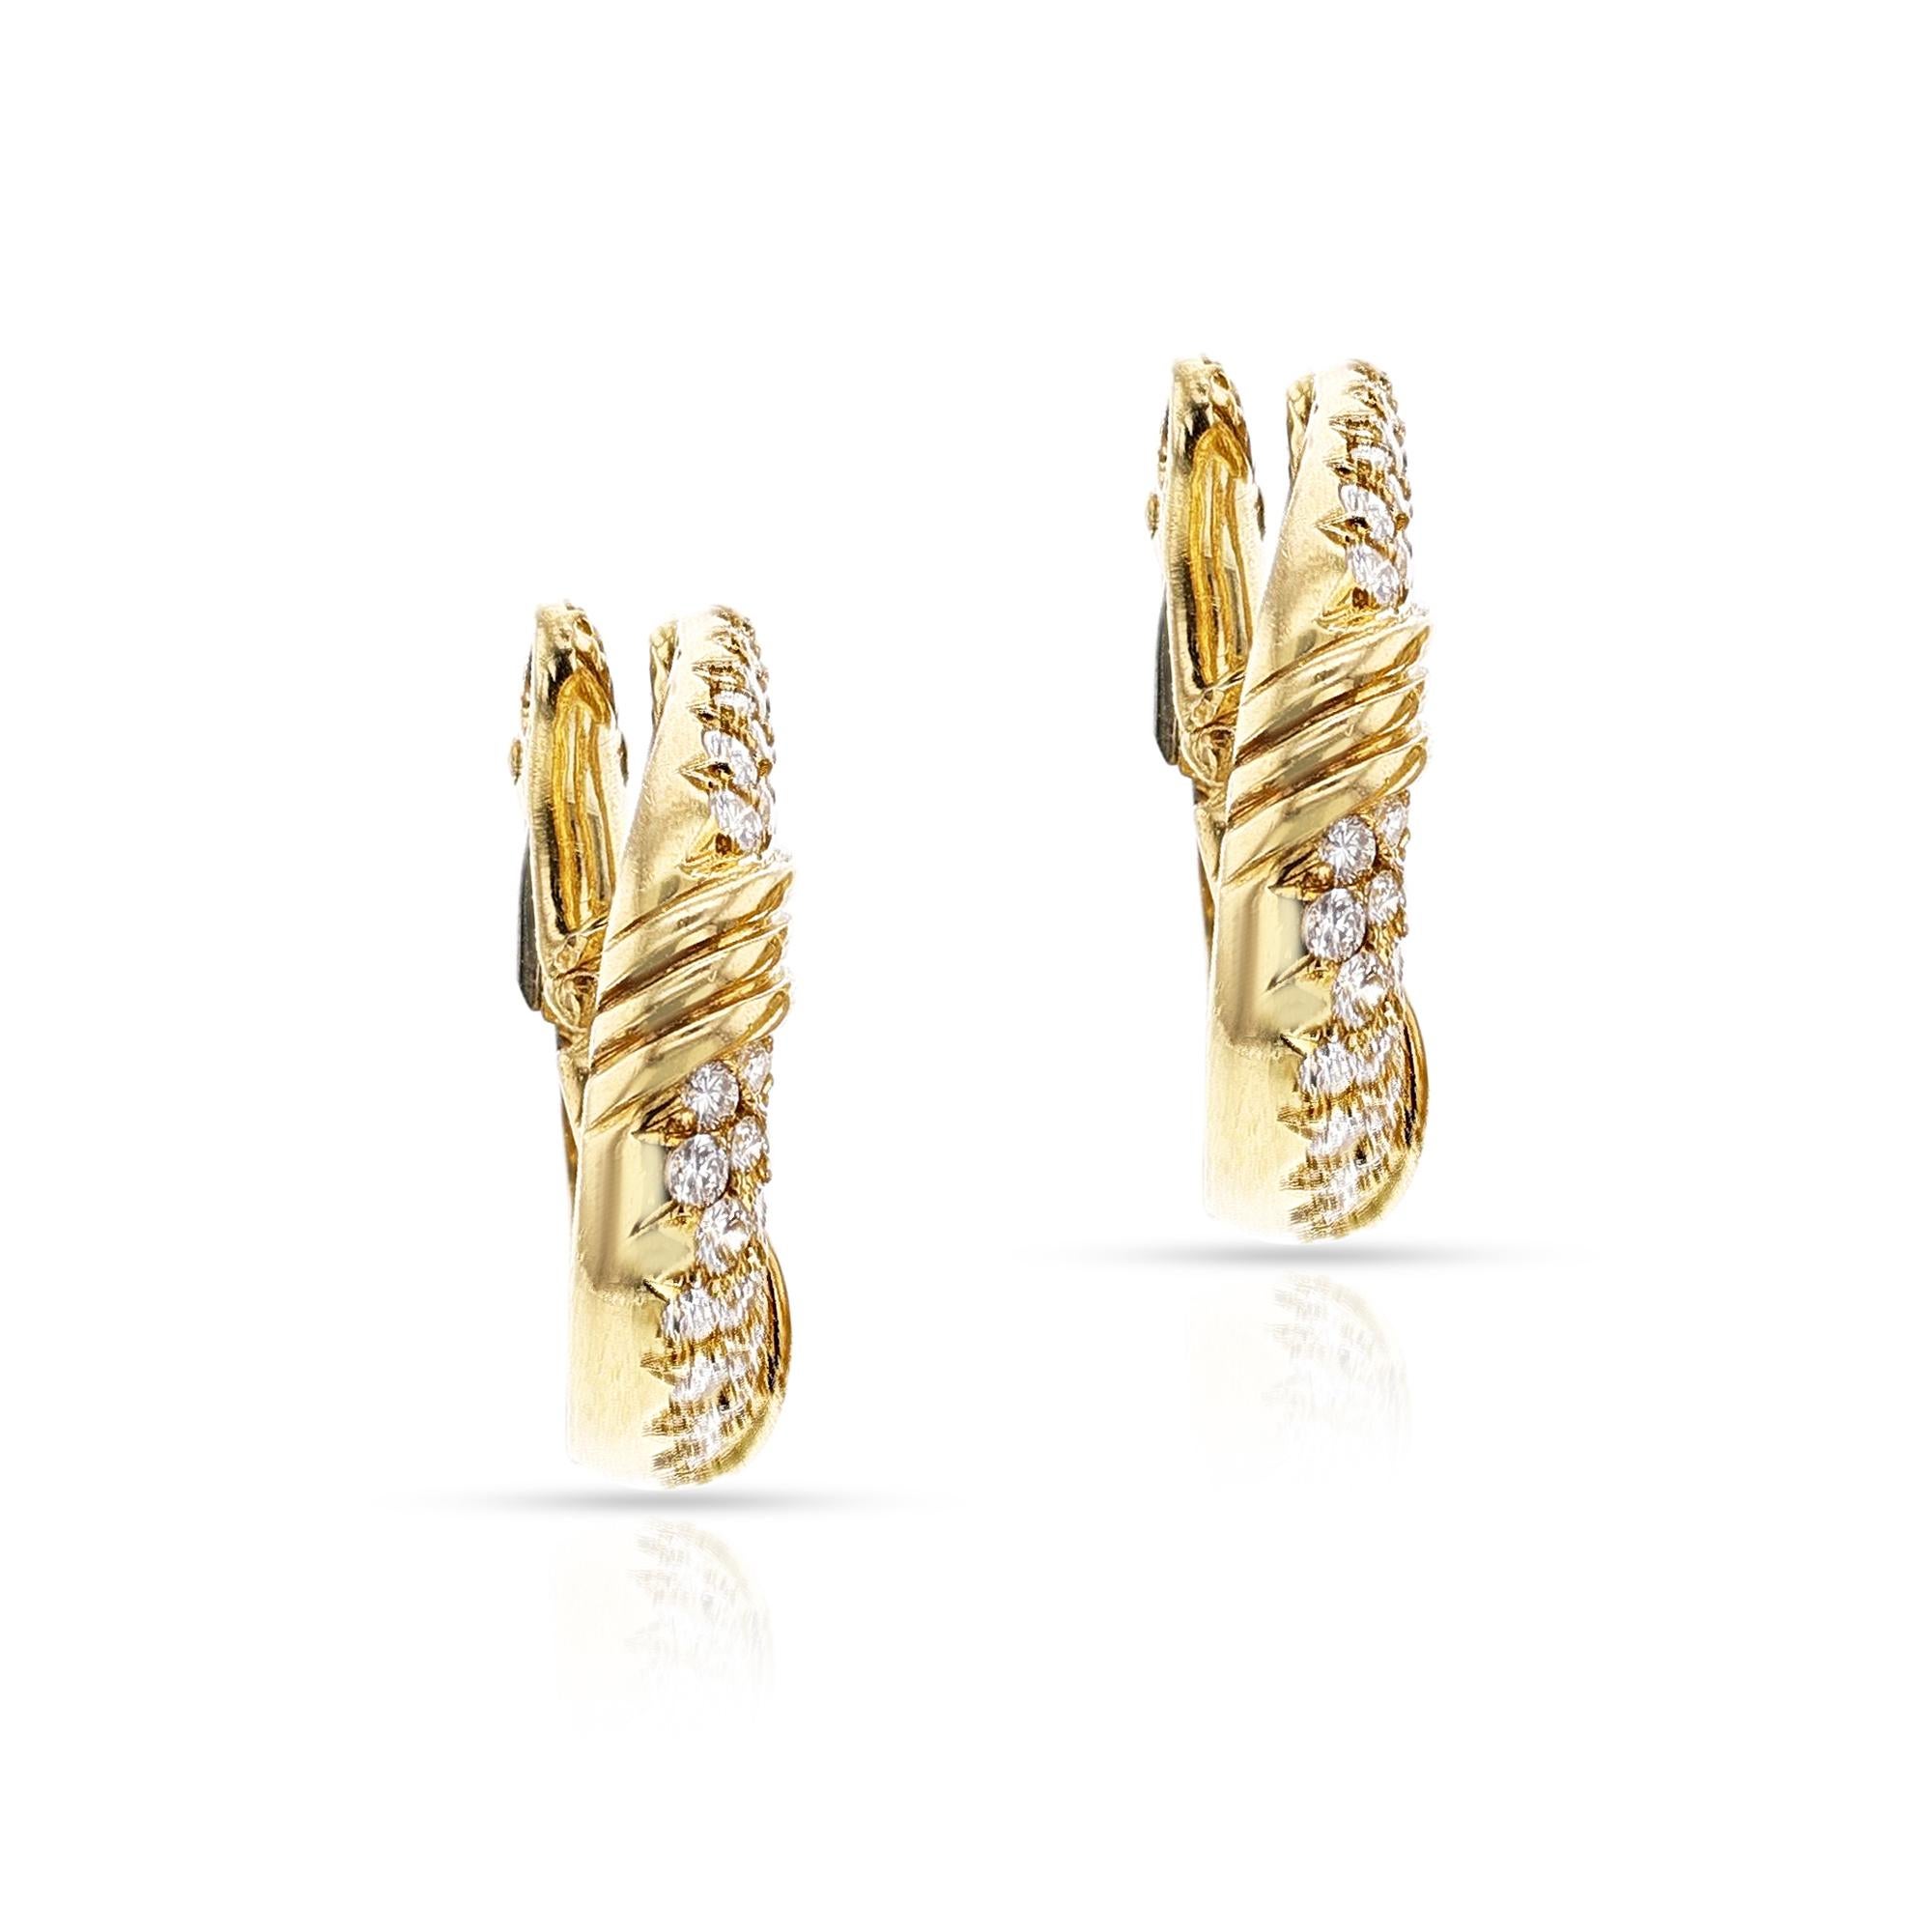 Van Cleef & Arpels Gold and Diamond Earrings, 18k In Excellent Condition For Sale In New York, NY